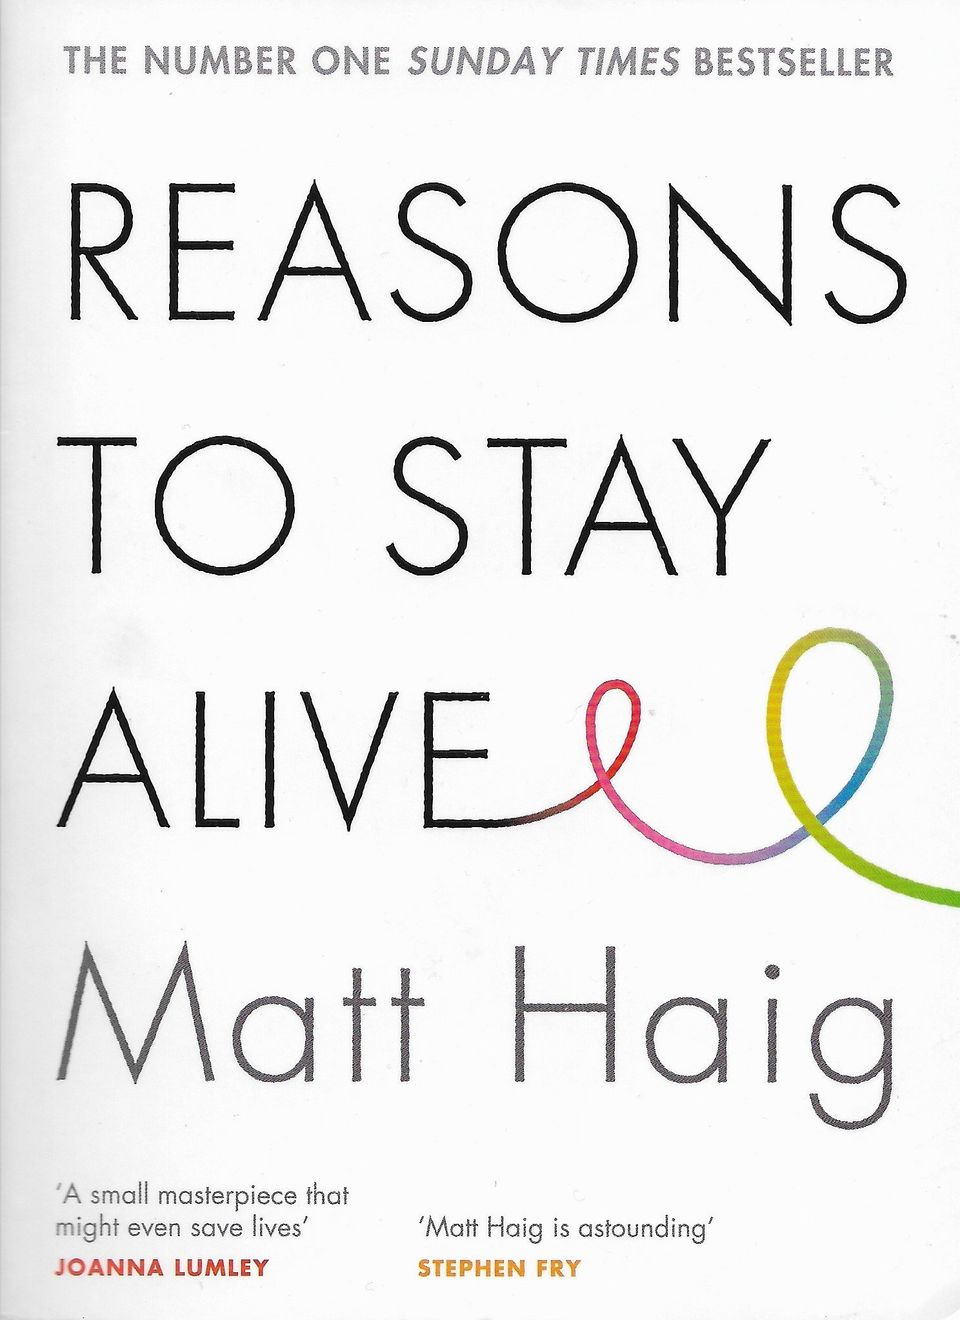 book reasons to stay alive